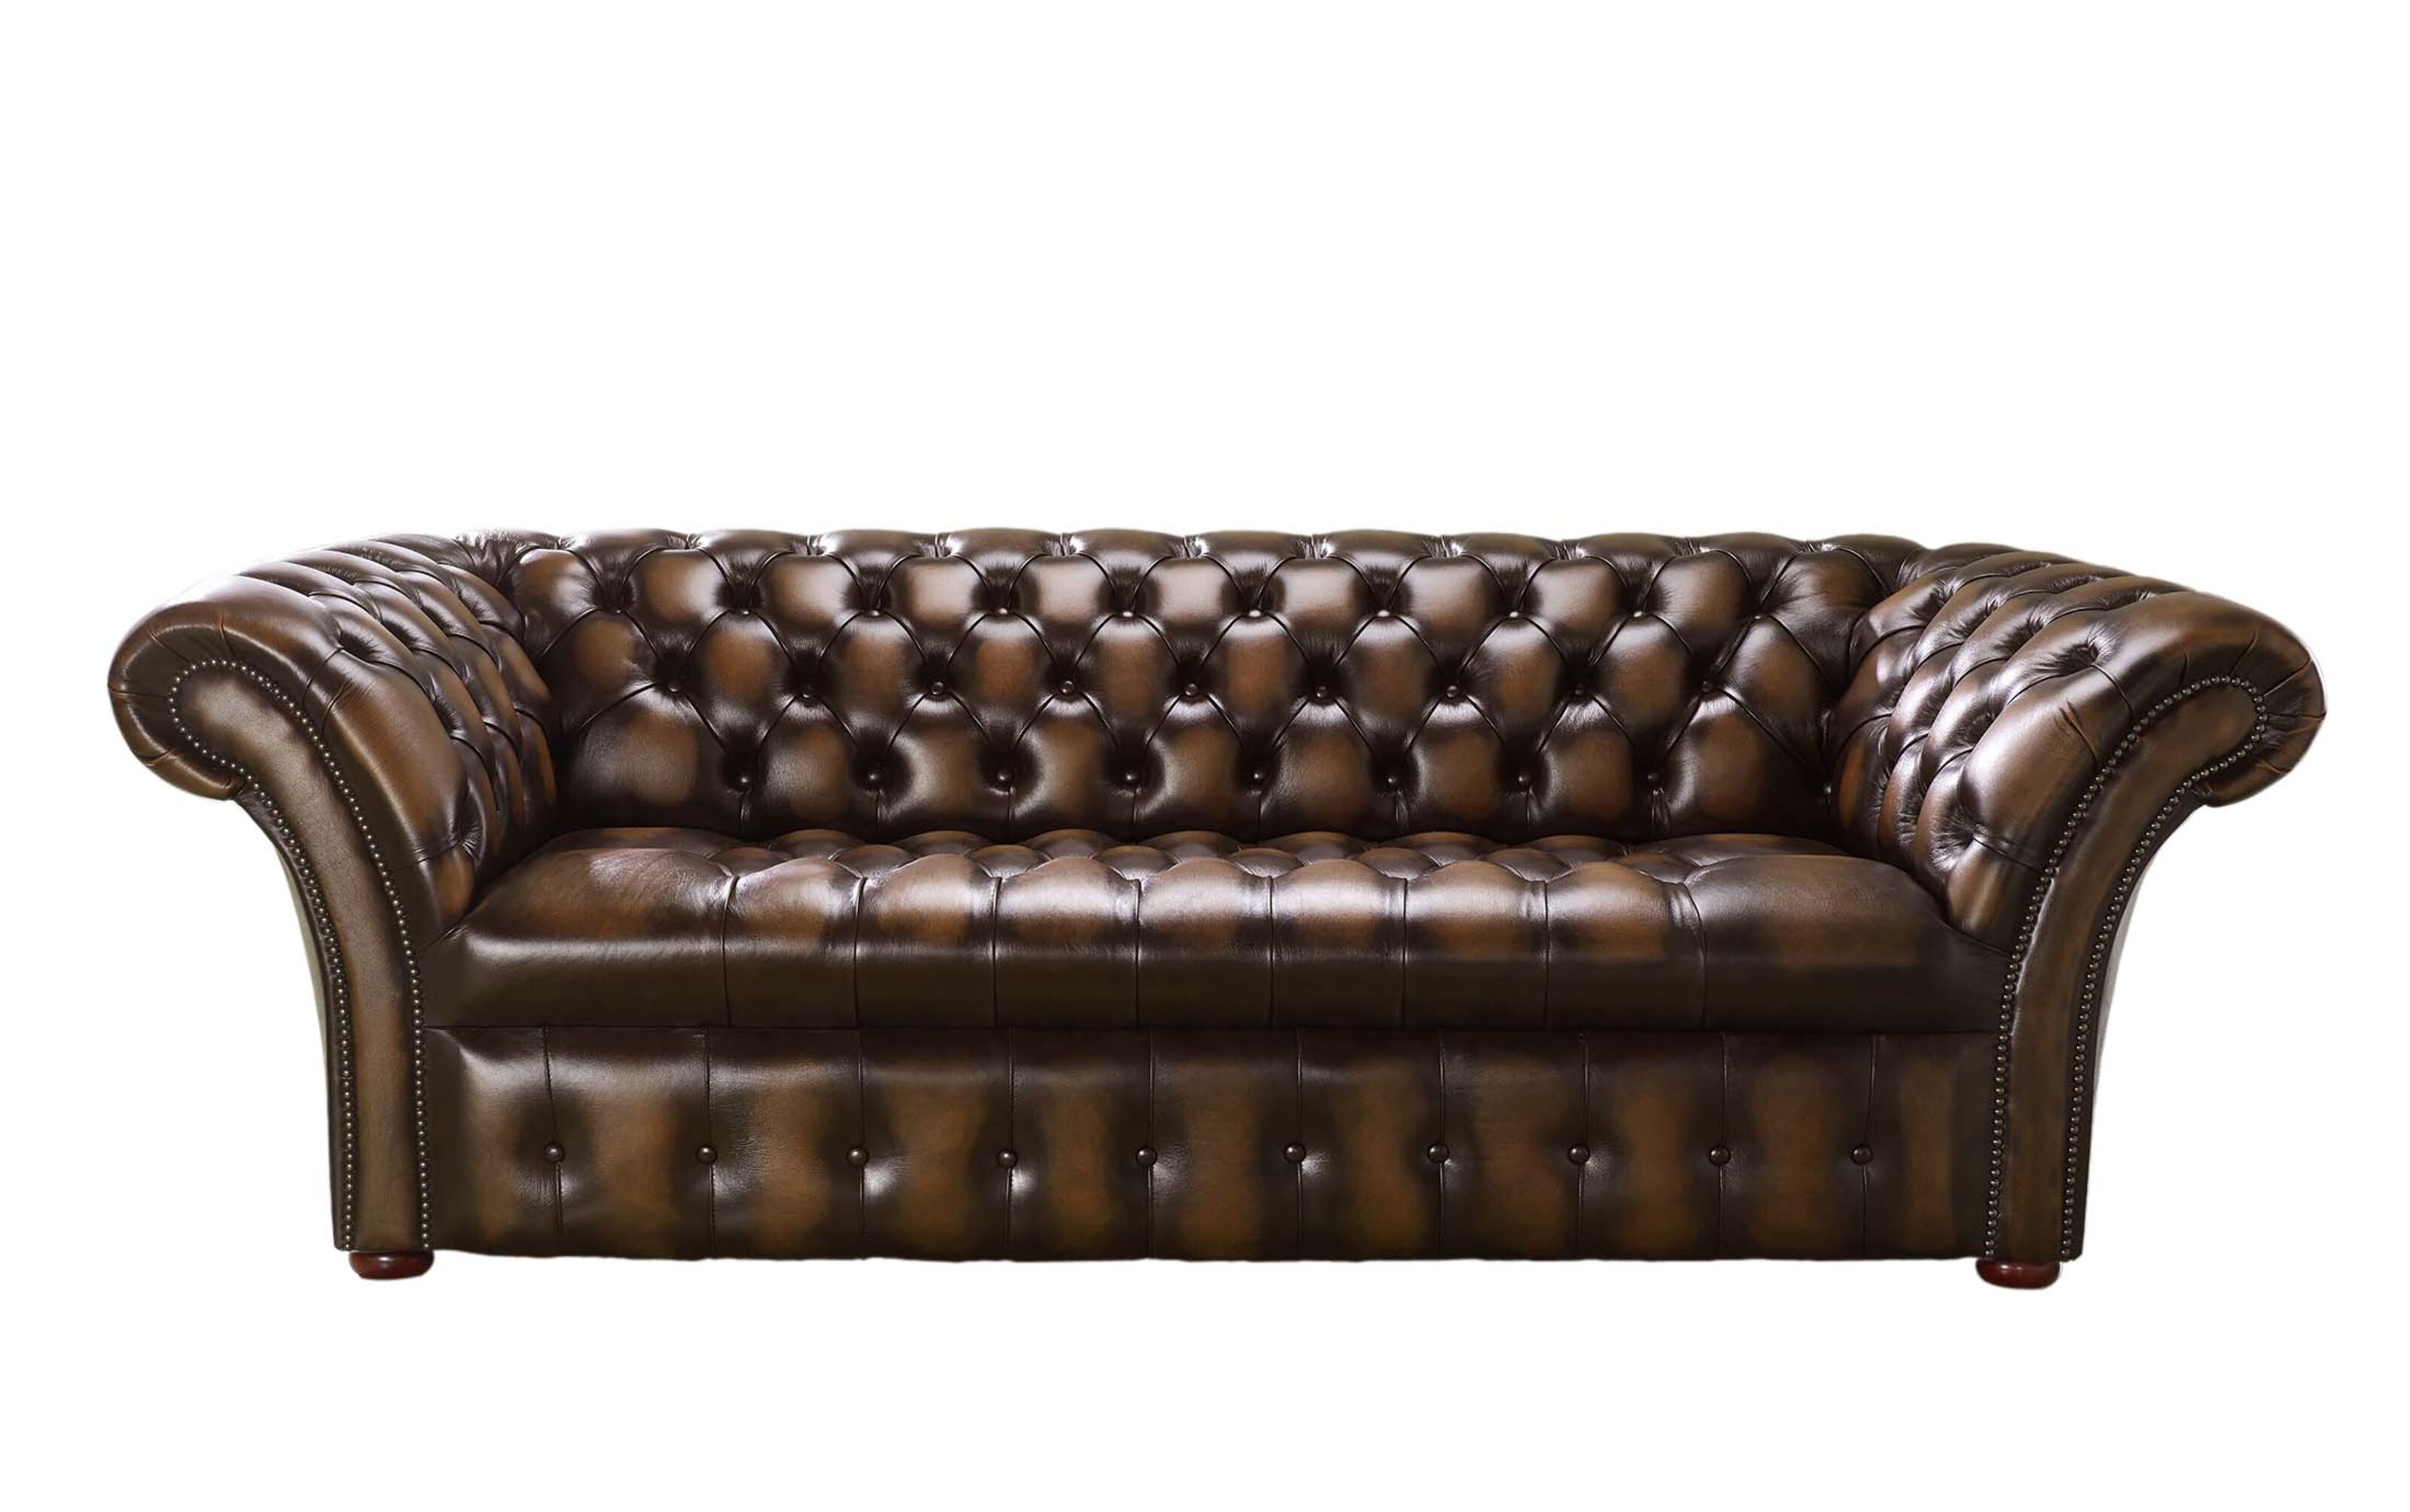 Chesterfield Queen Anne: A Versatile Choice for All Your Needs  %Post Title